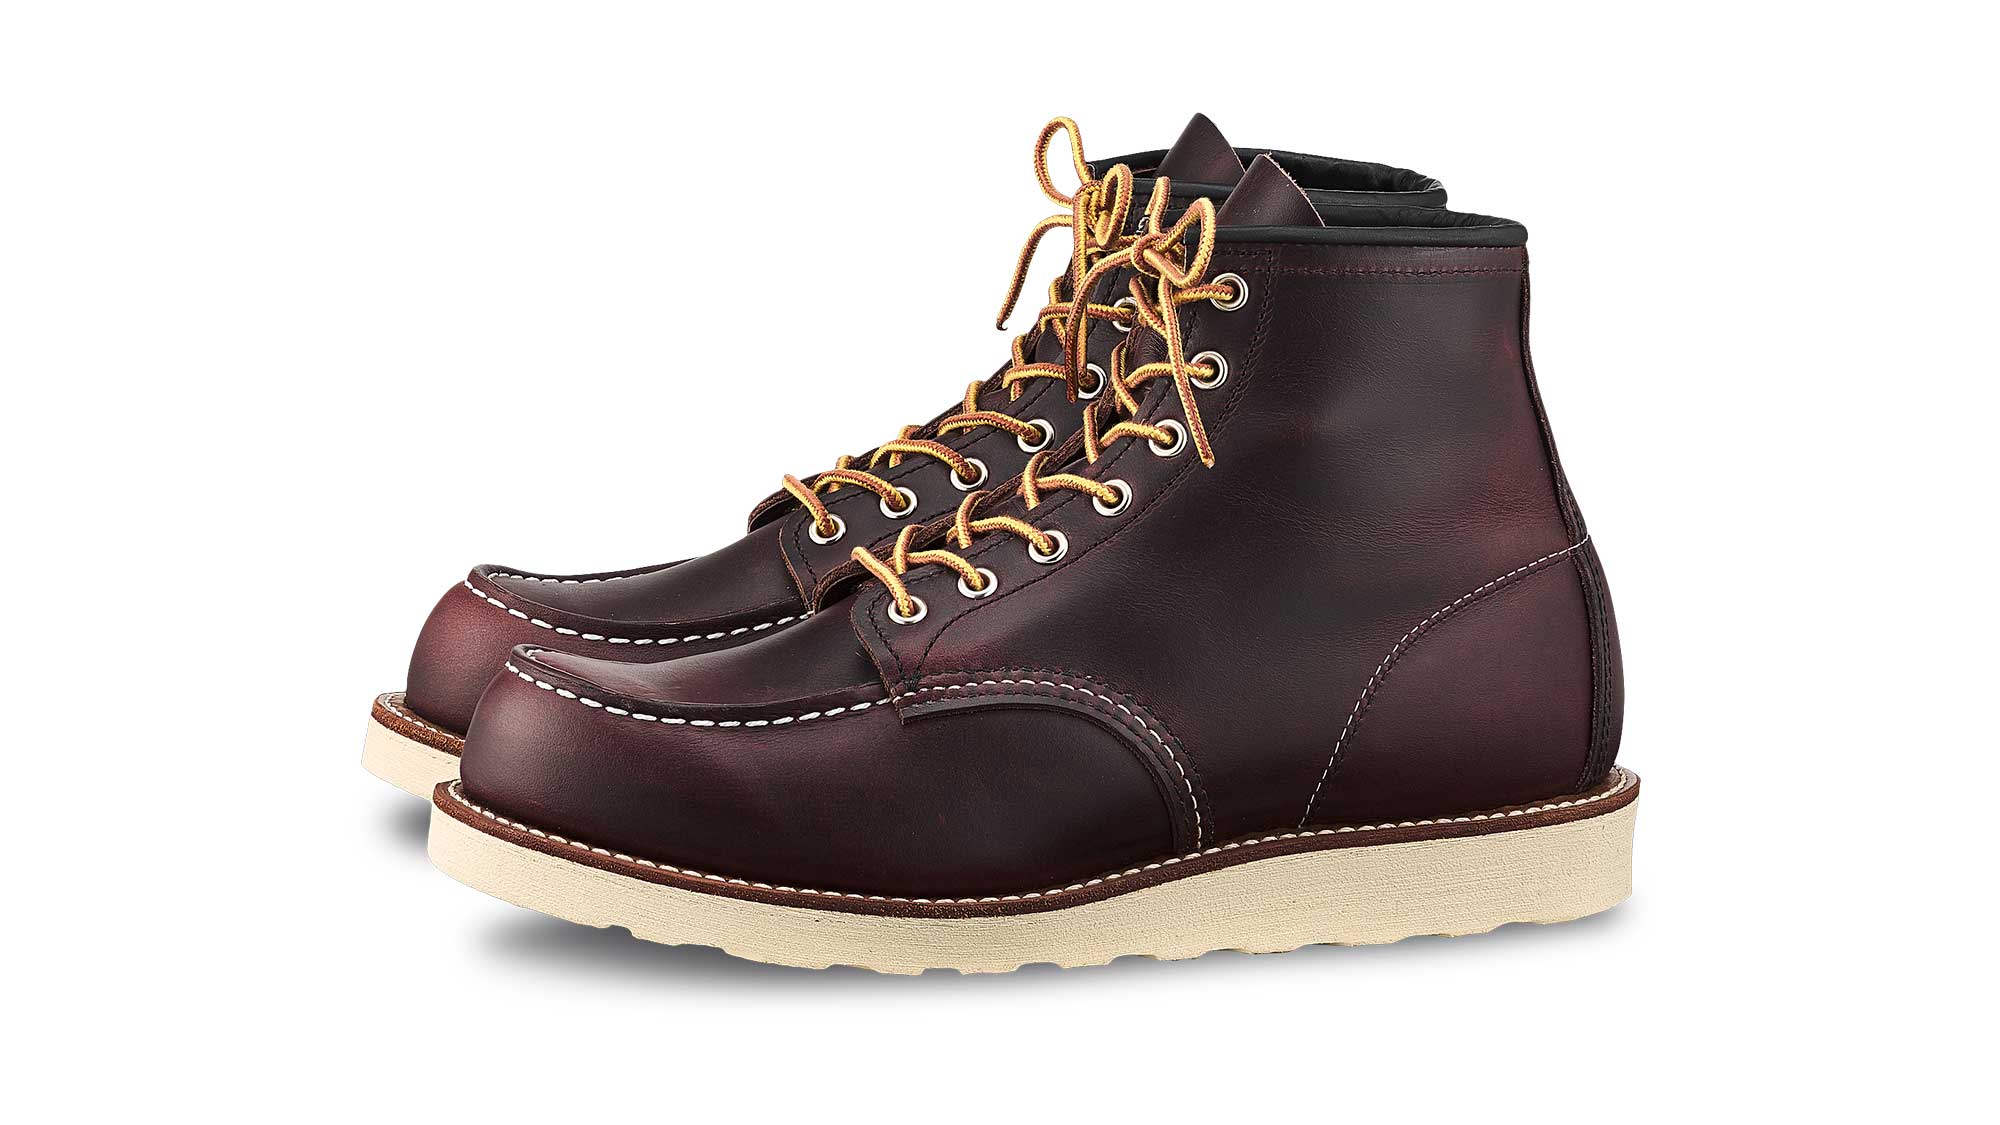 Shop the Moc Toe 8875 | Official Red Wing Shoes Online Store